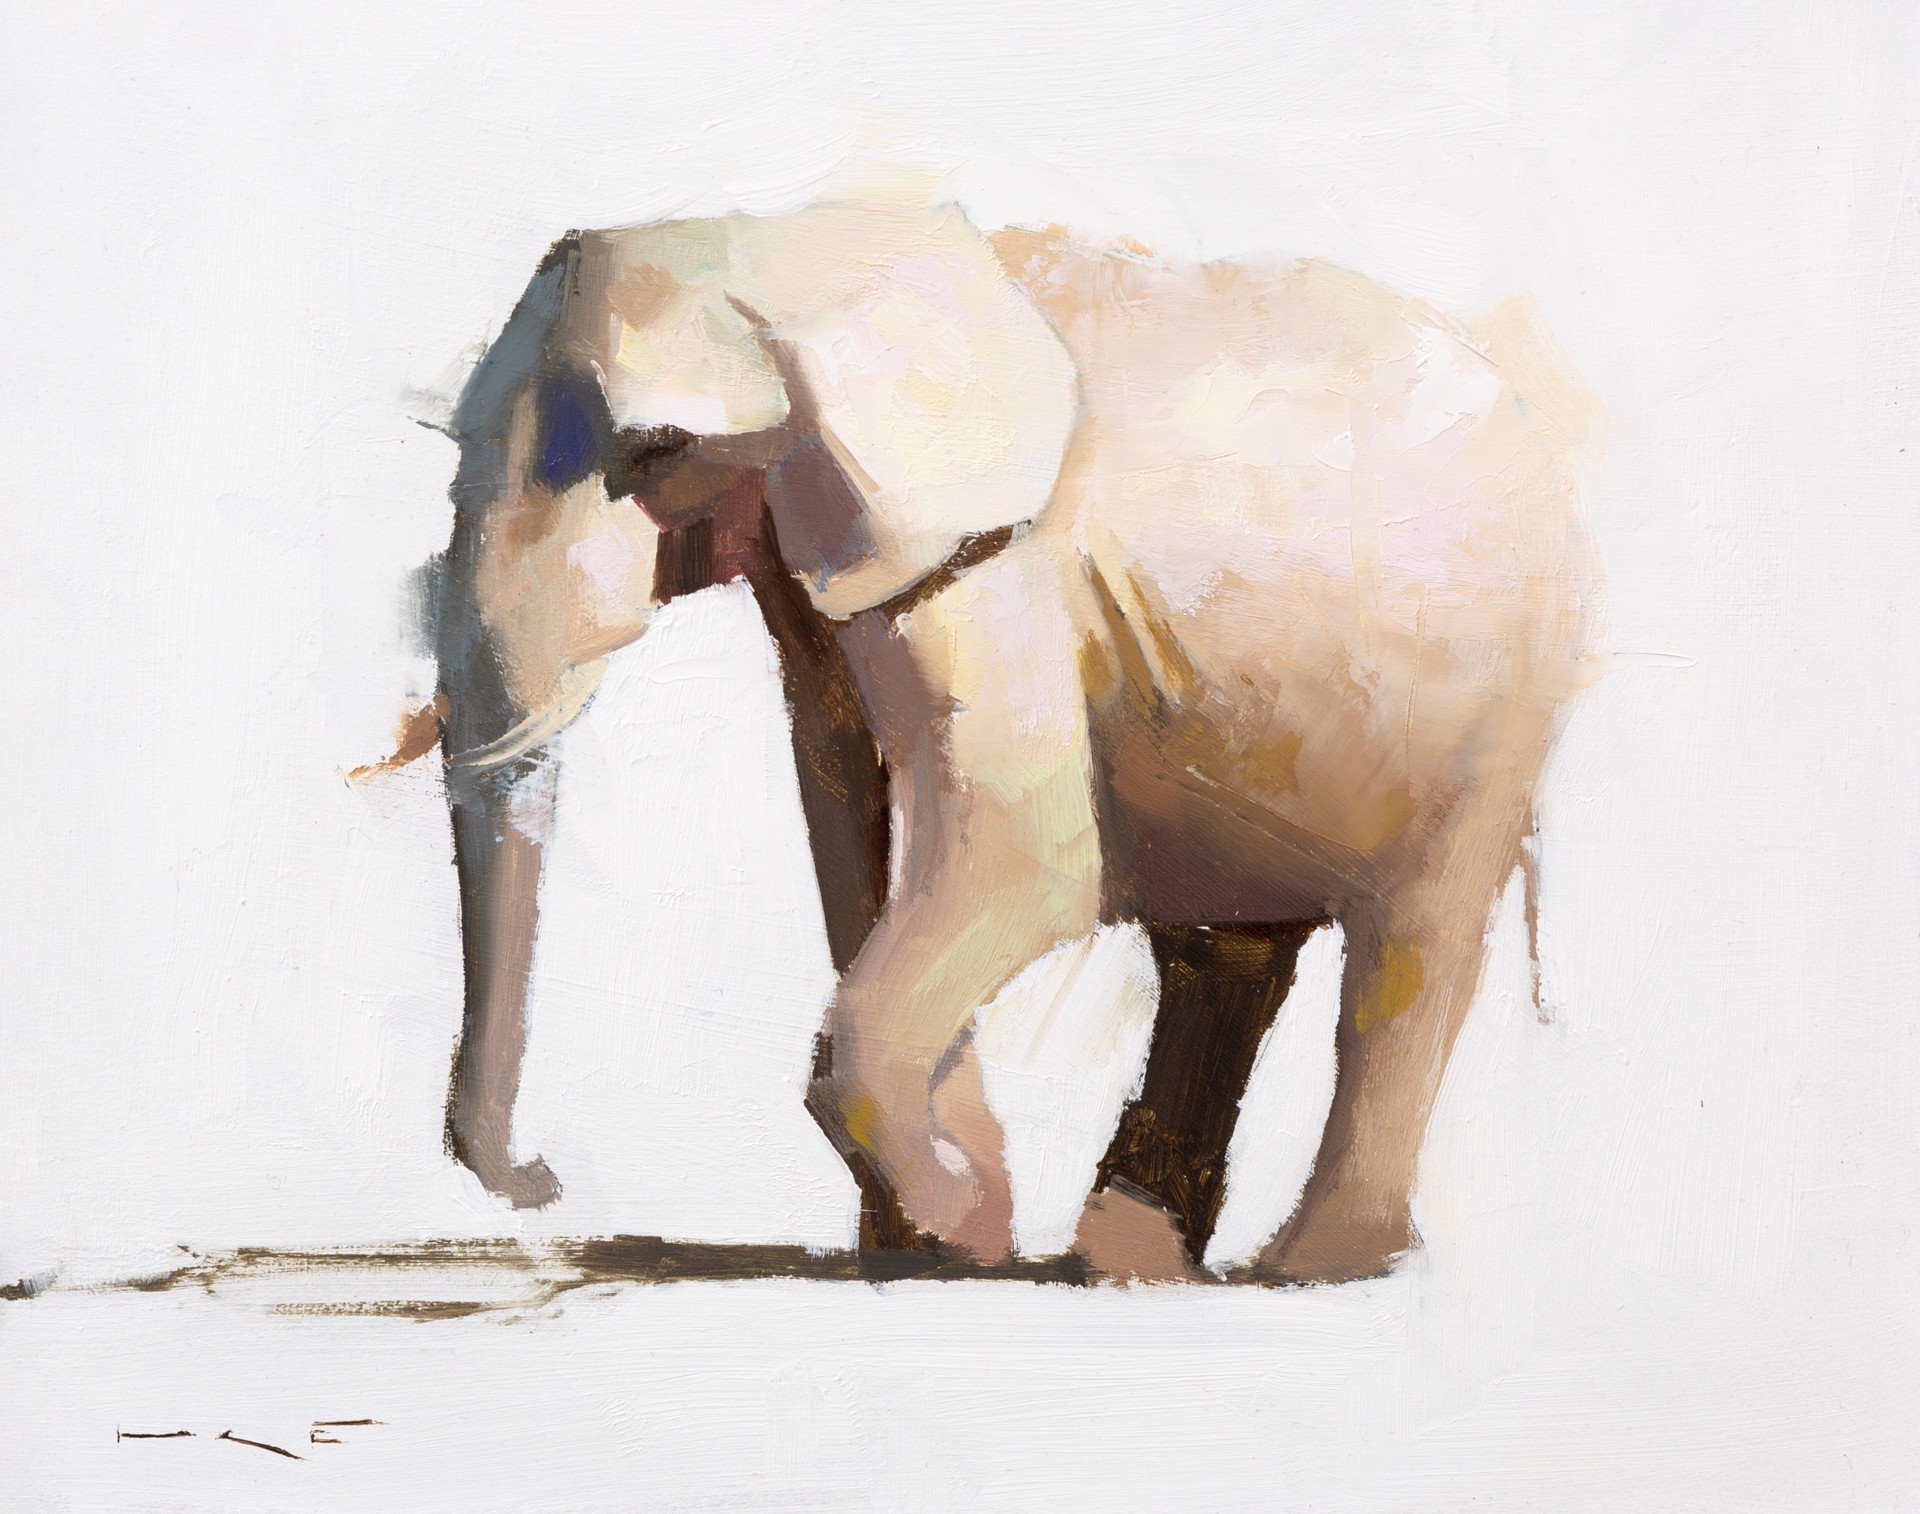 My Lovely Elephant by Thorgrimur Einarsson